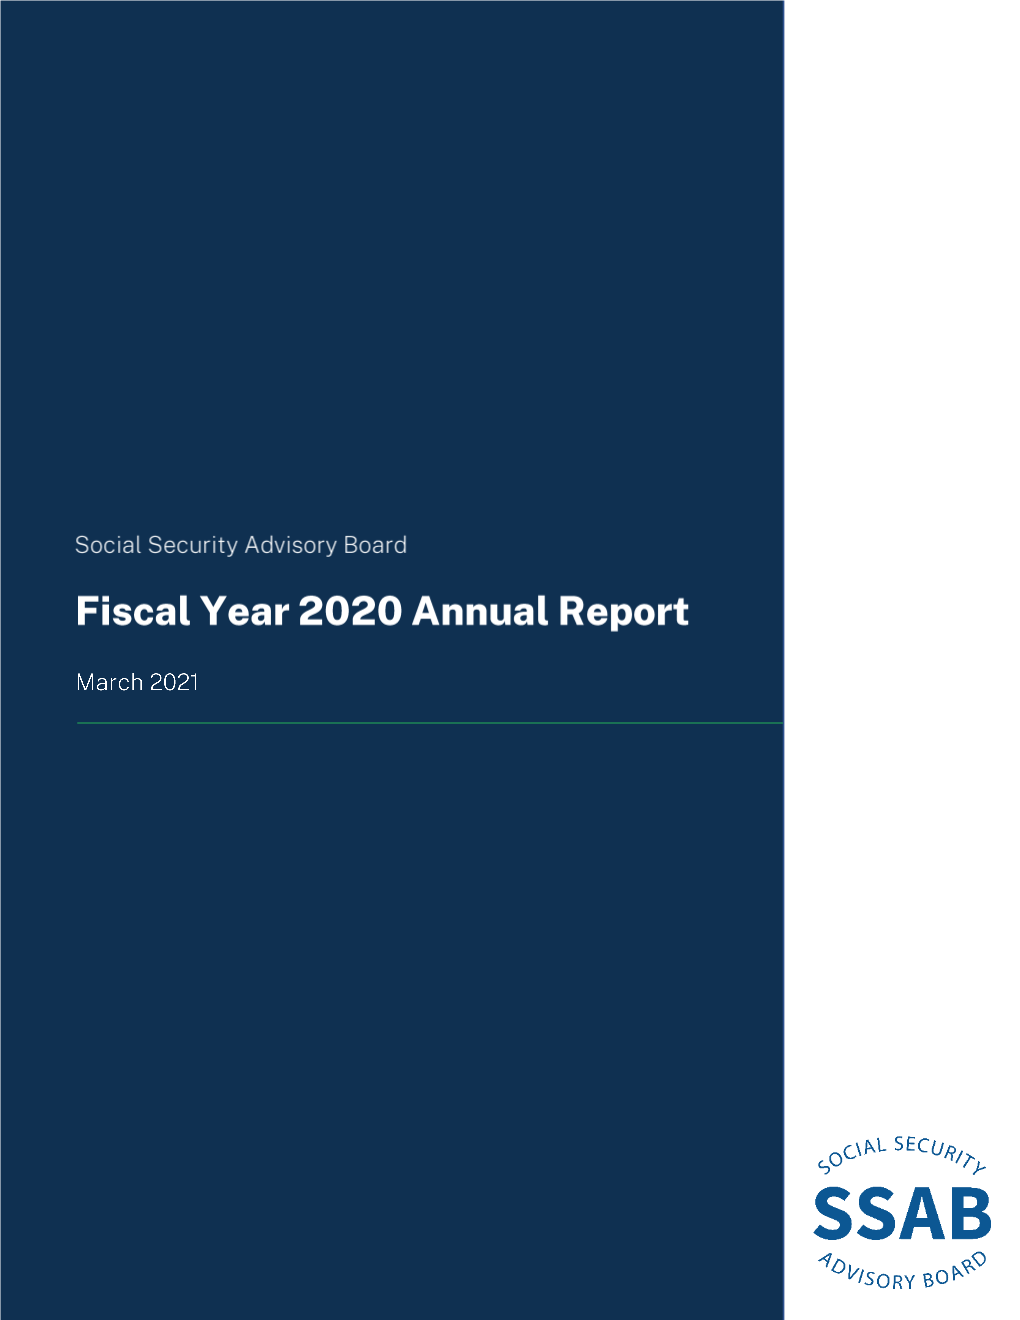 Annual Report FY 2020 Combined